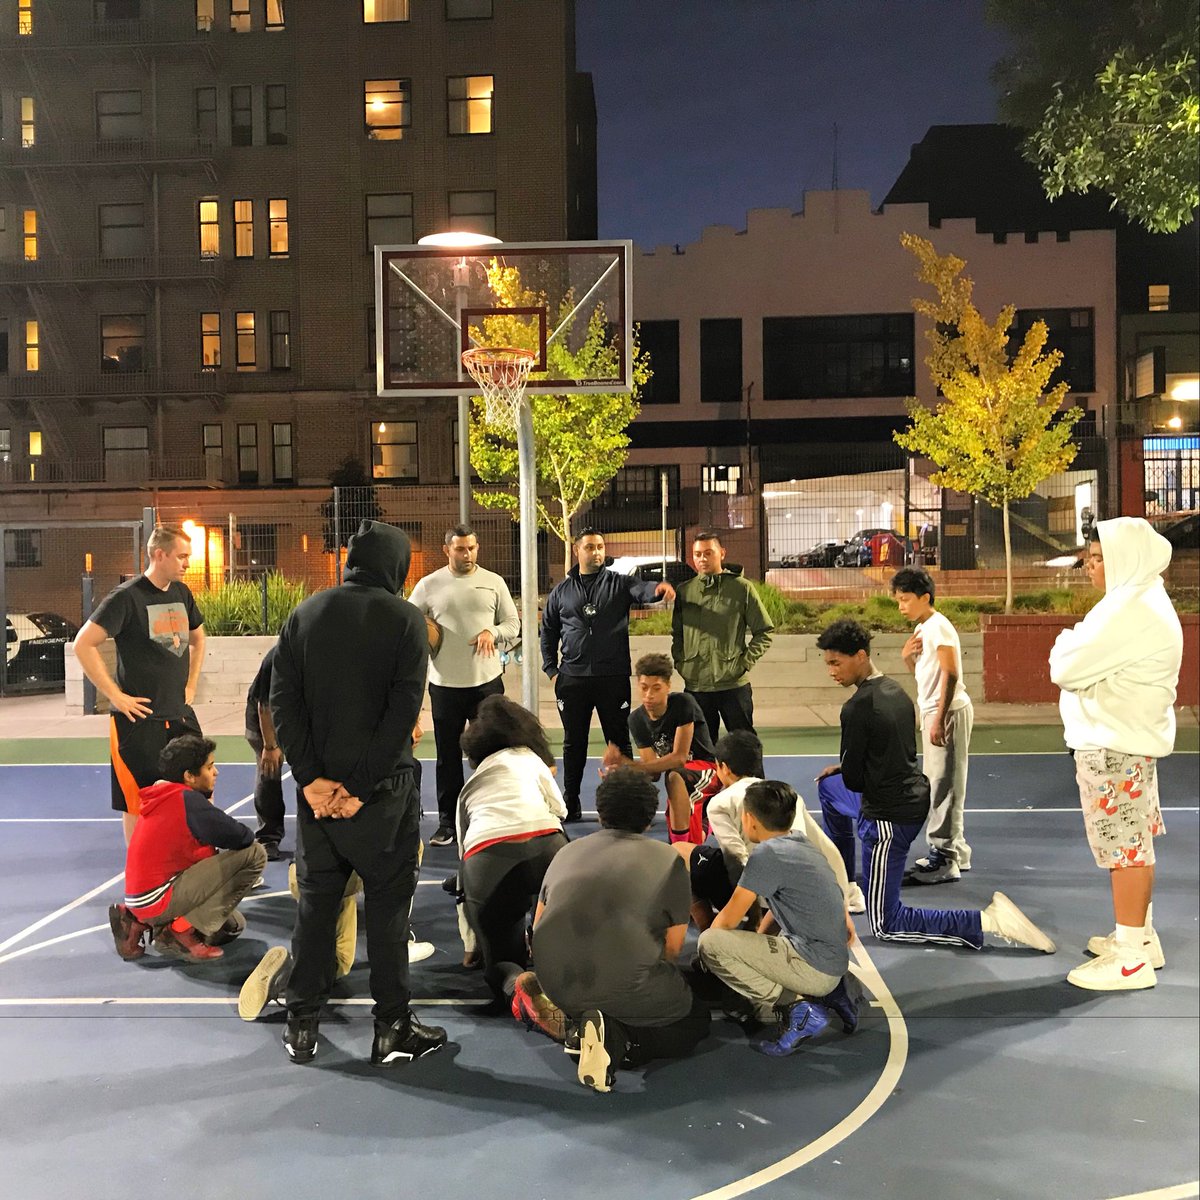 Cops and basketball, getting prepared for the beyond the badge basketball tournament Nov 17th at the Kroc center!